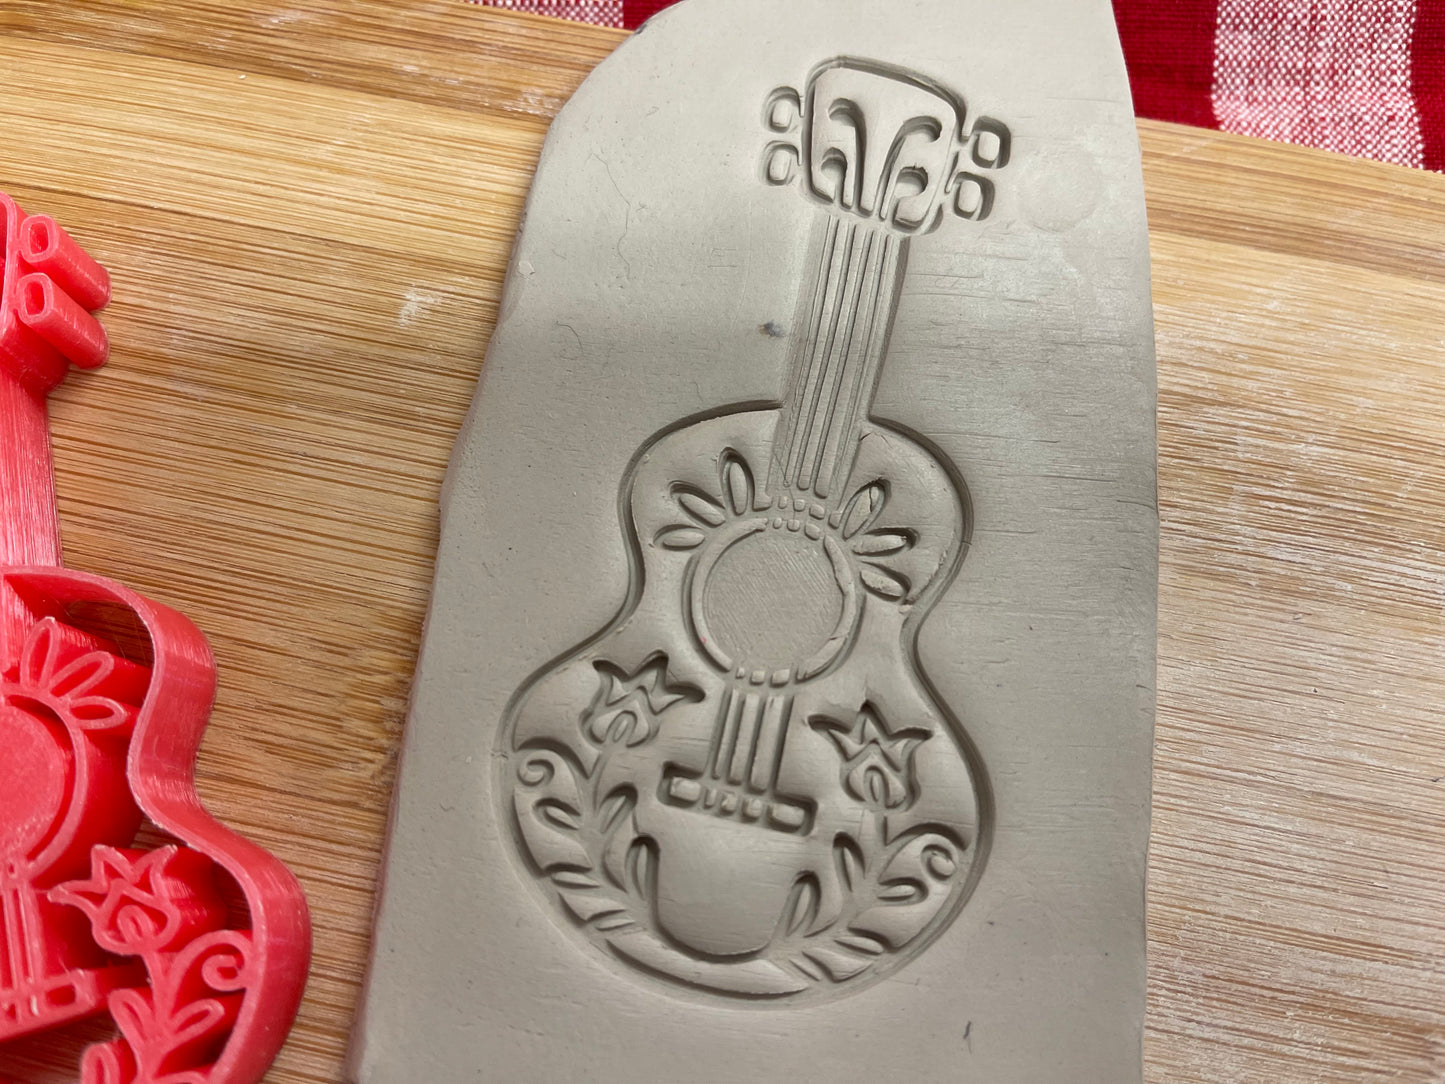 Guitar stamp, Day of the Dead Design, plastic 3D printed, pottery tool